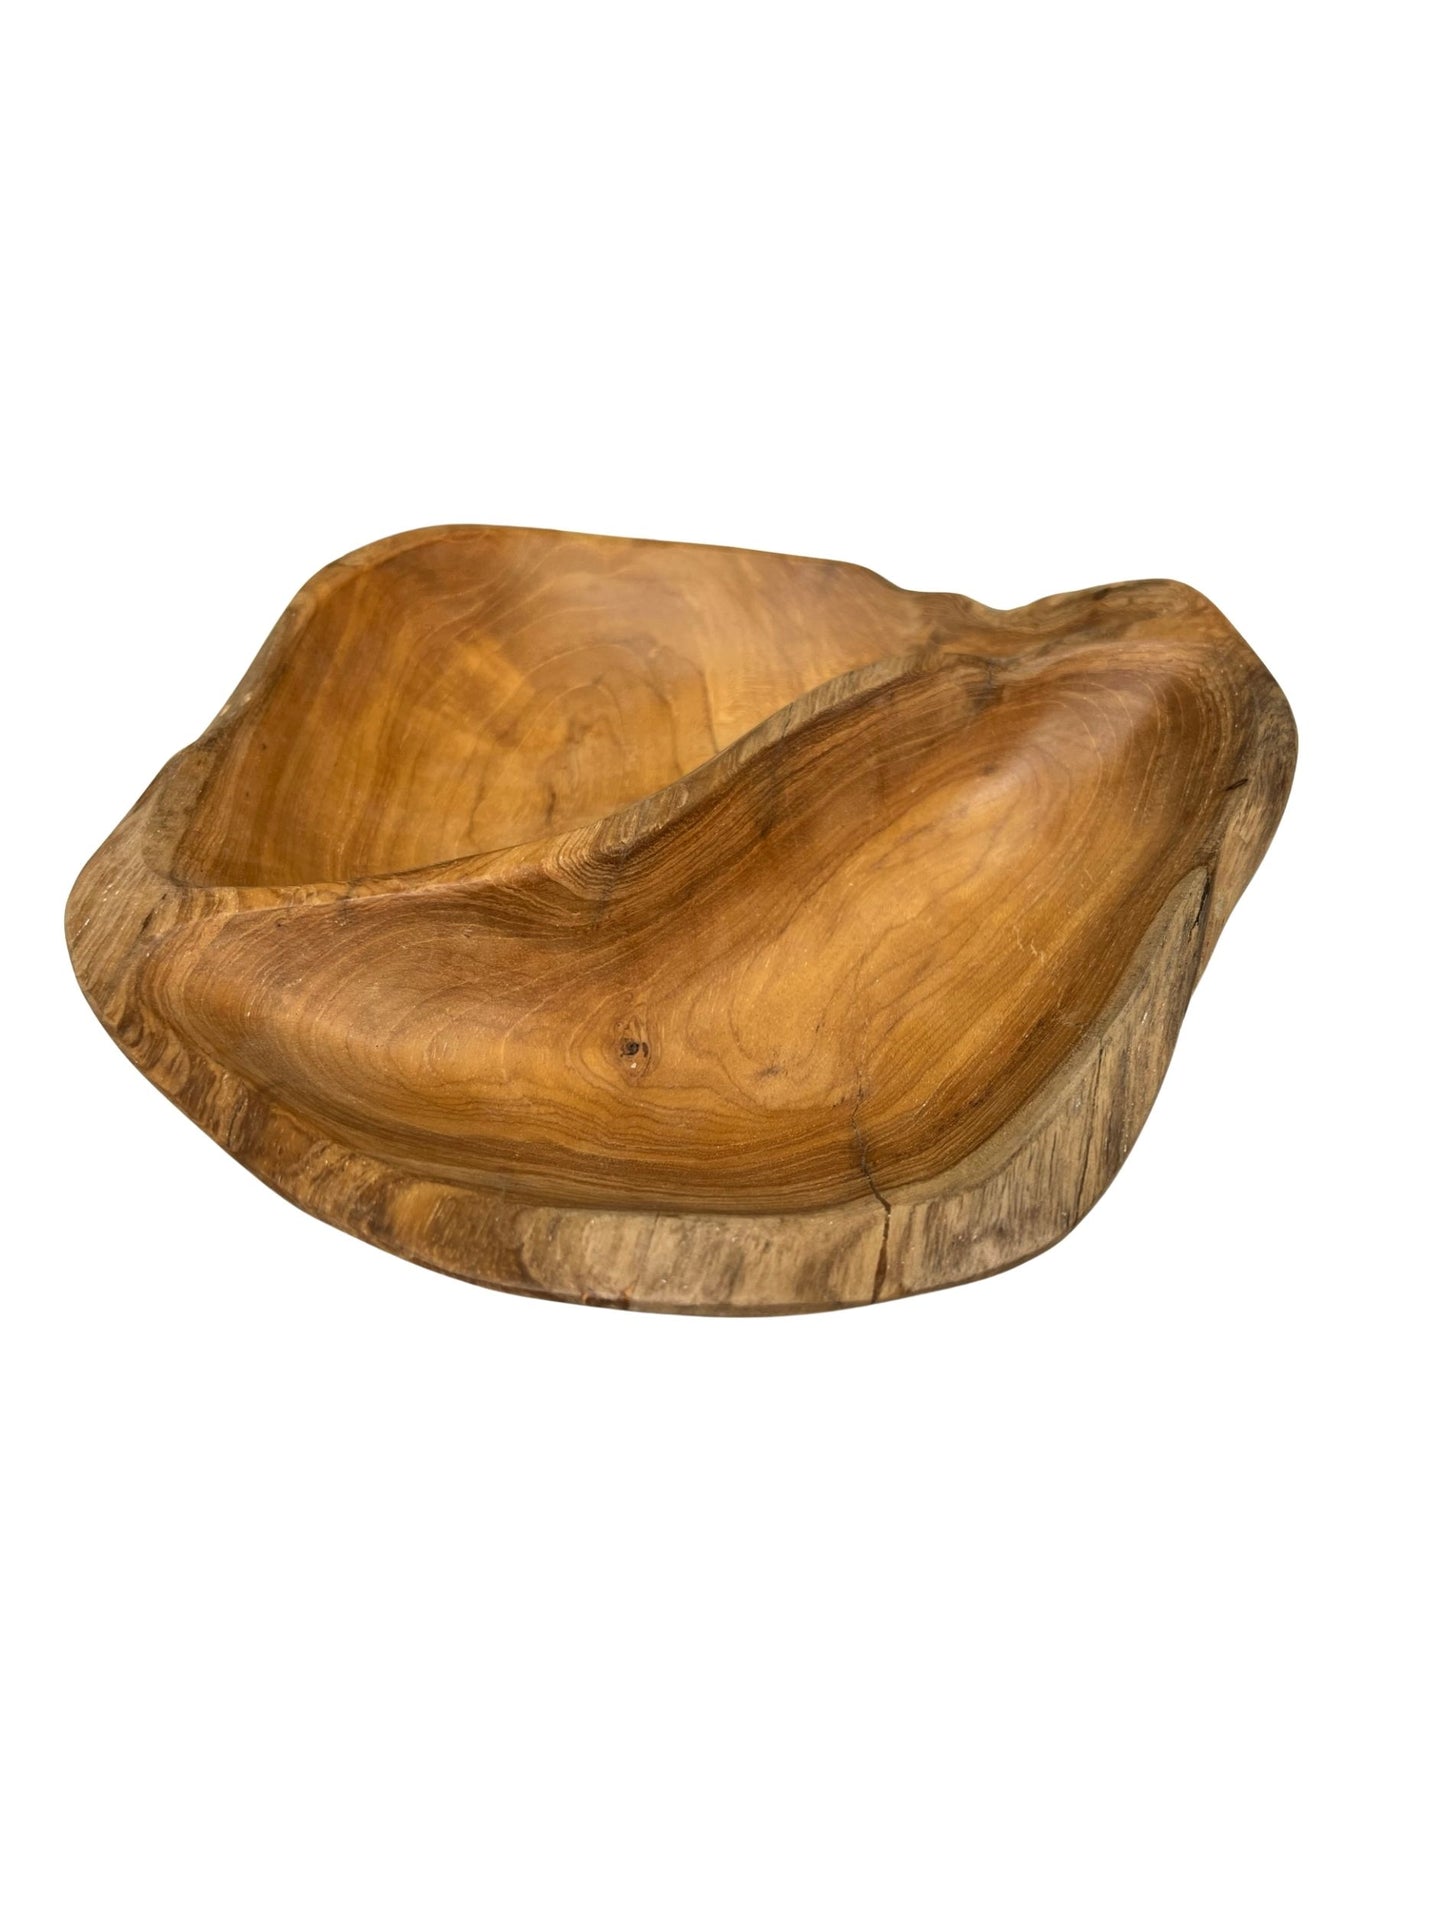 Eclectic Home Accent Teak Plate 2916 Natural  Decor Furniture